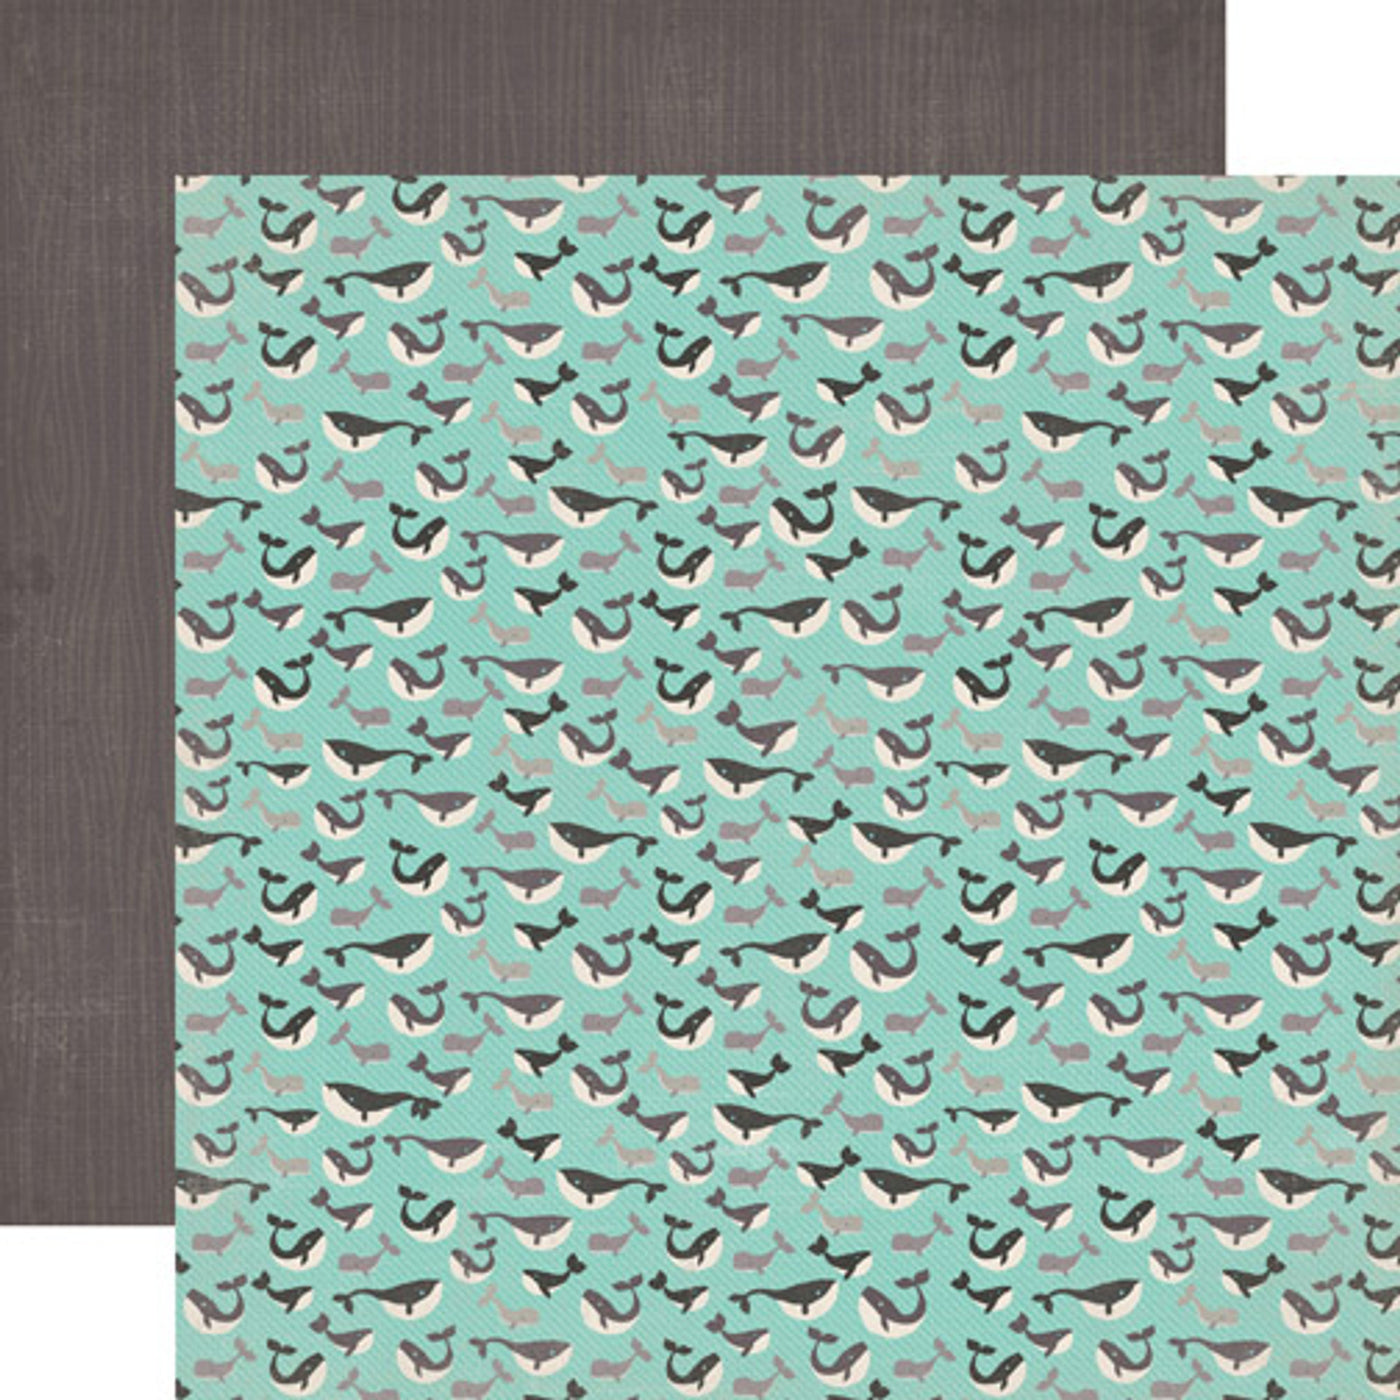 12x12 double-sided sheet. (Side A - cute little gray whales on a turquoise background. Side B - gray woodgrain background) Archival quality, acid-free. 